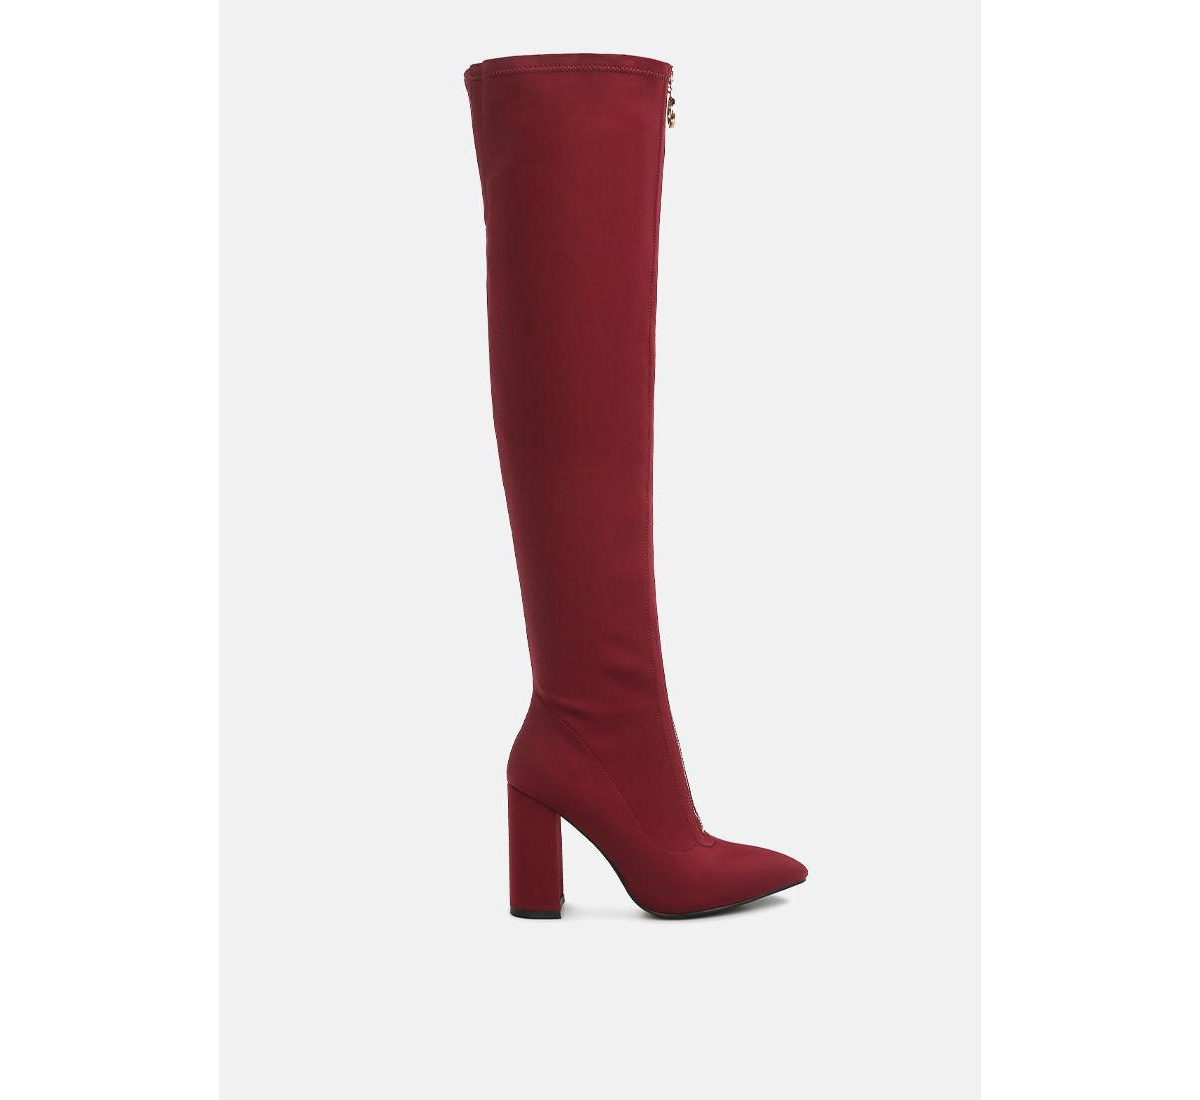 ronettes over-the-knee boot - Fuchsia